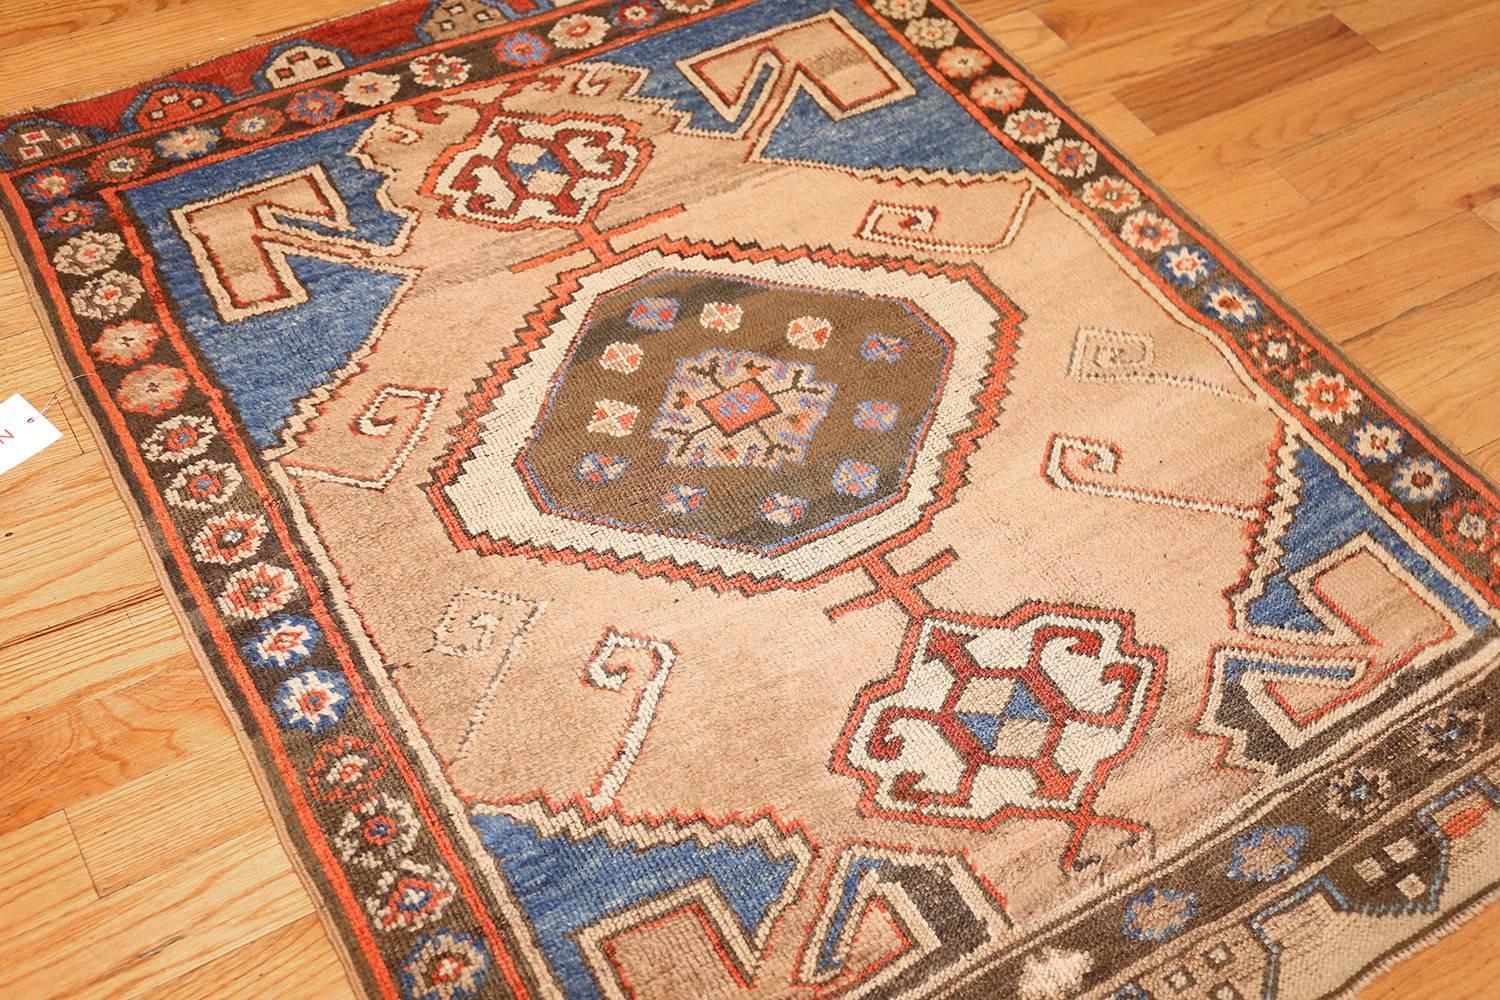 Small Scatter Size Tribal Antique Turkish Karapinar Rug 1